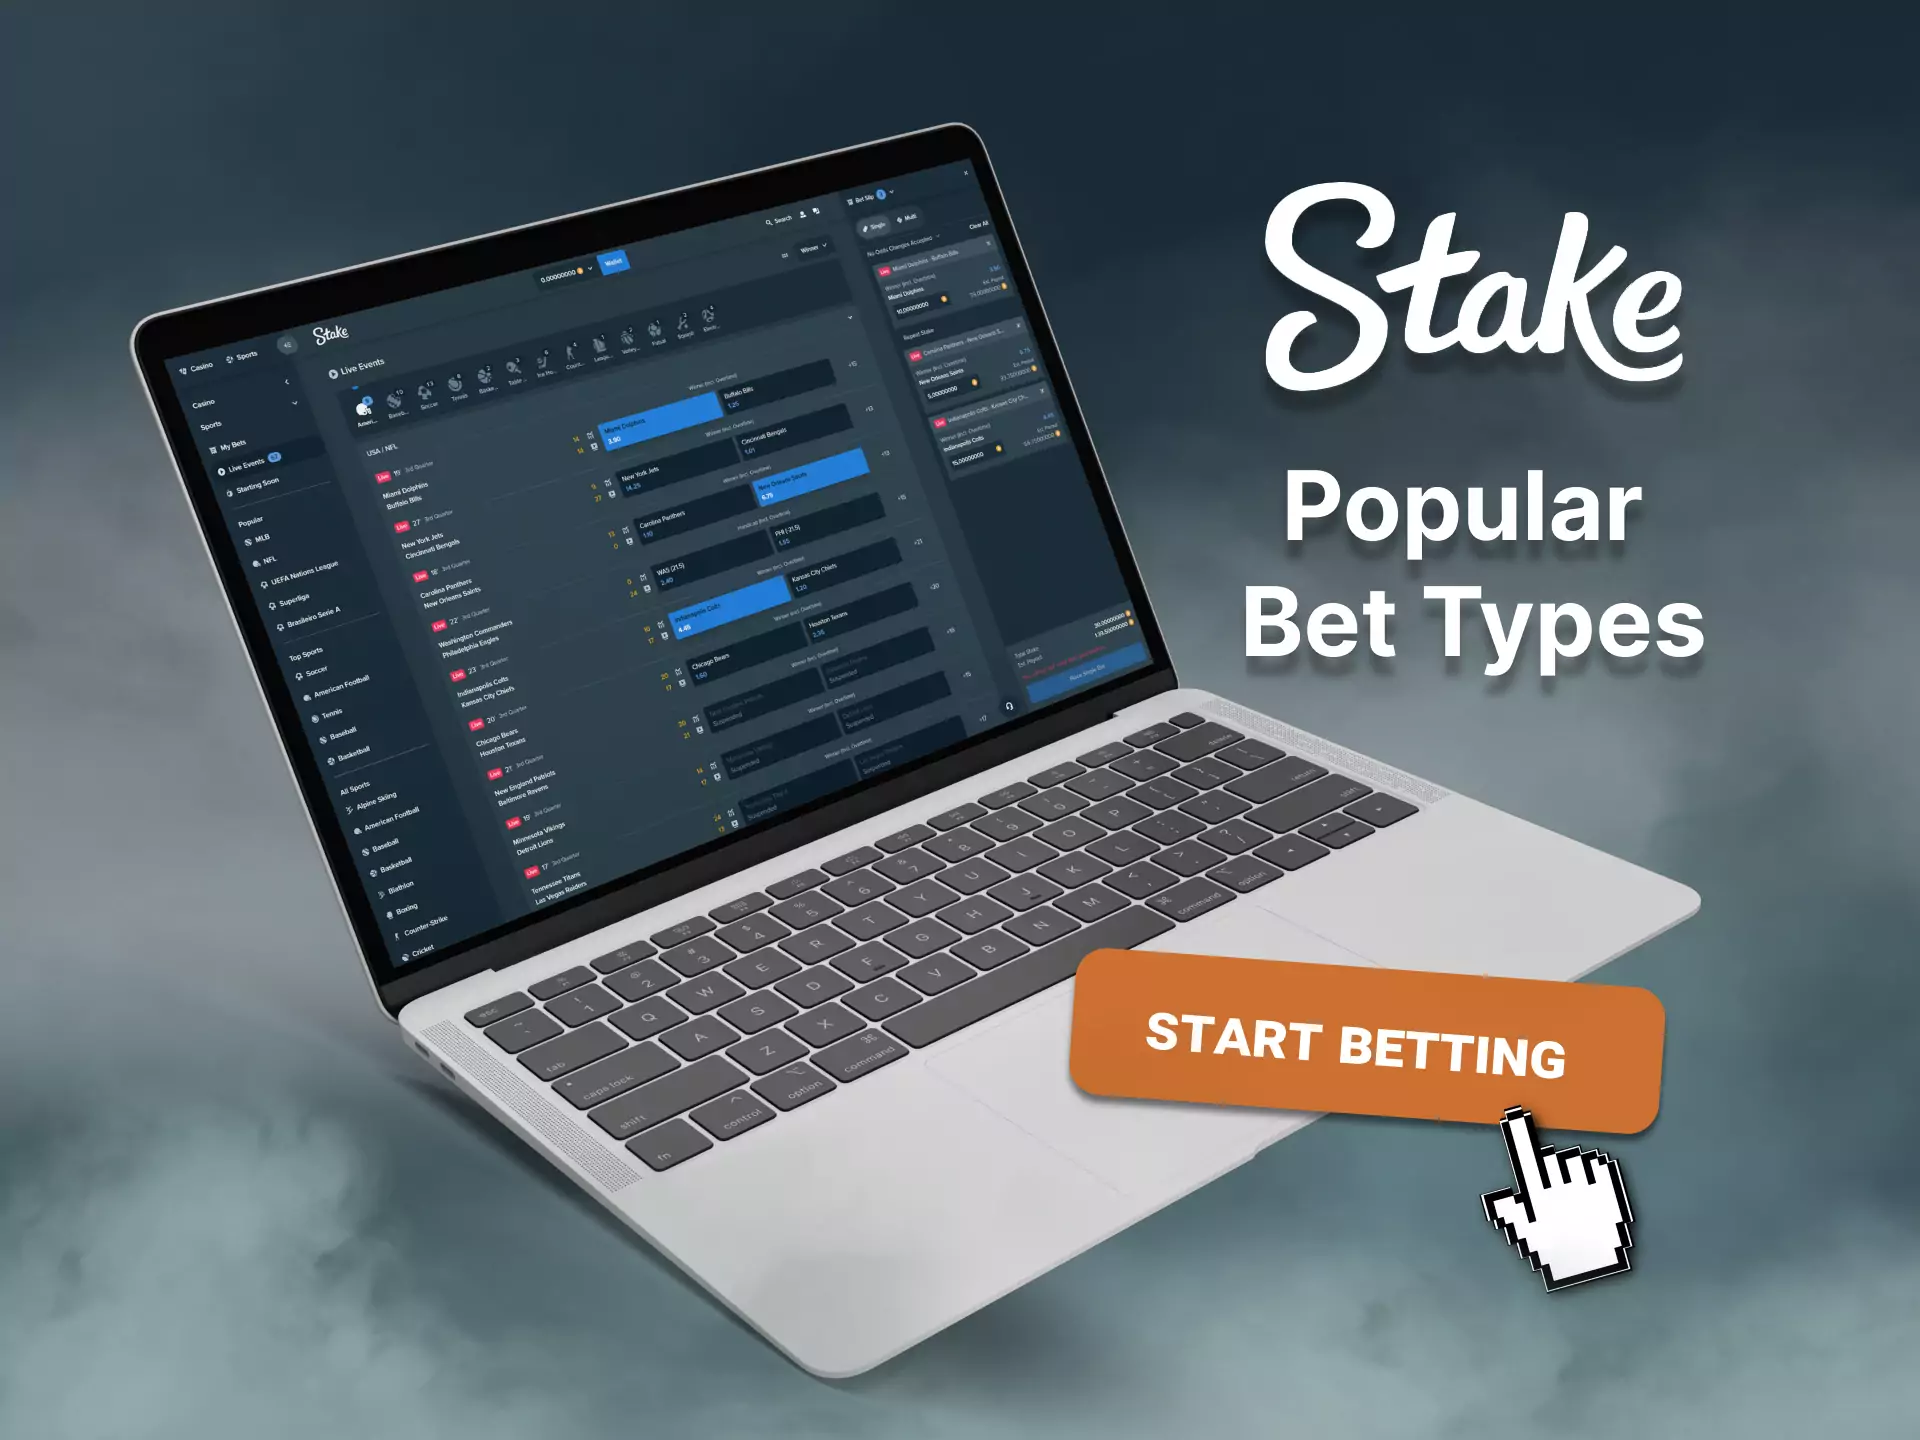 On the Stake website, there are different bet types available for players.